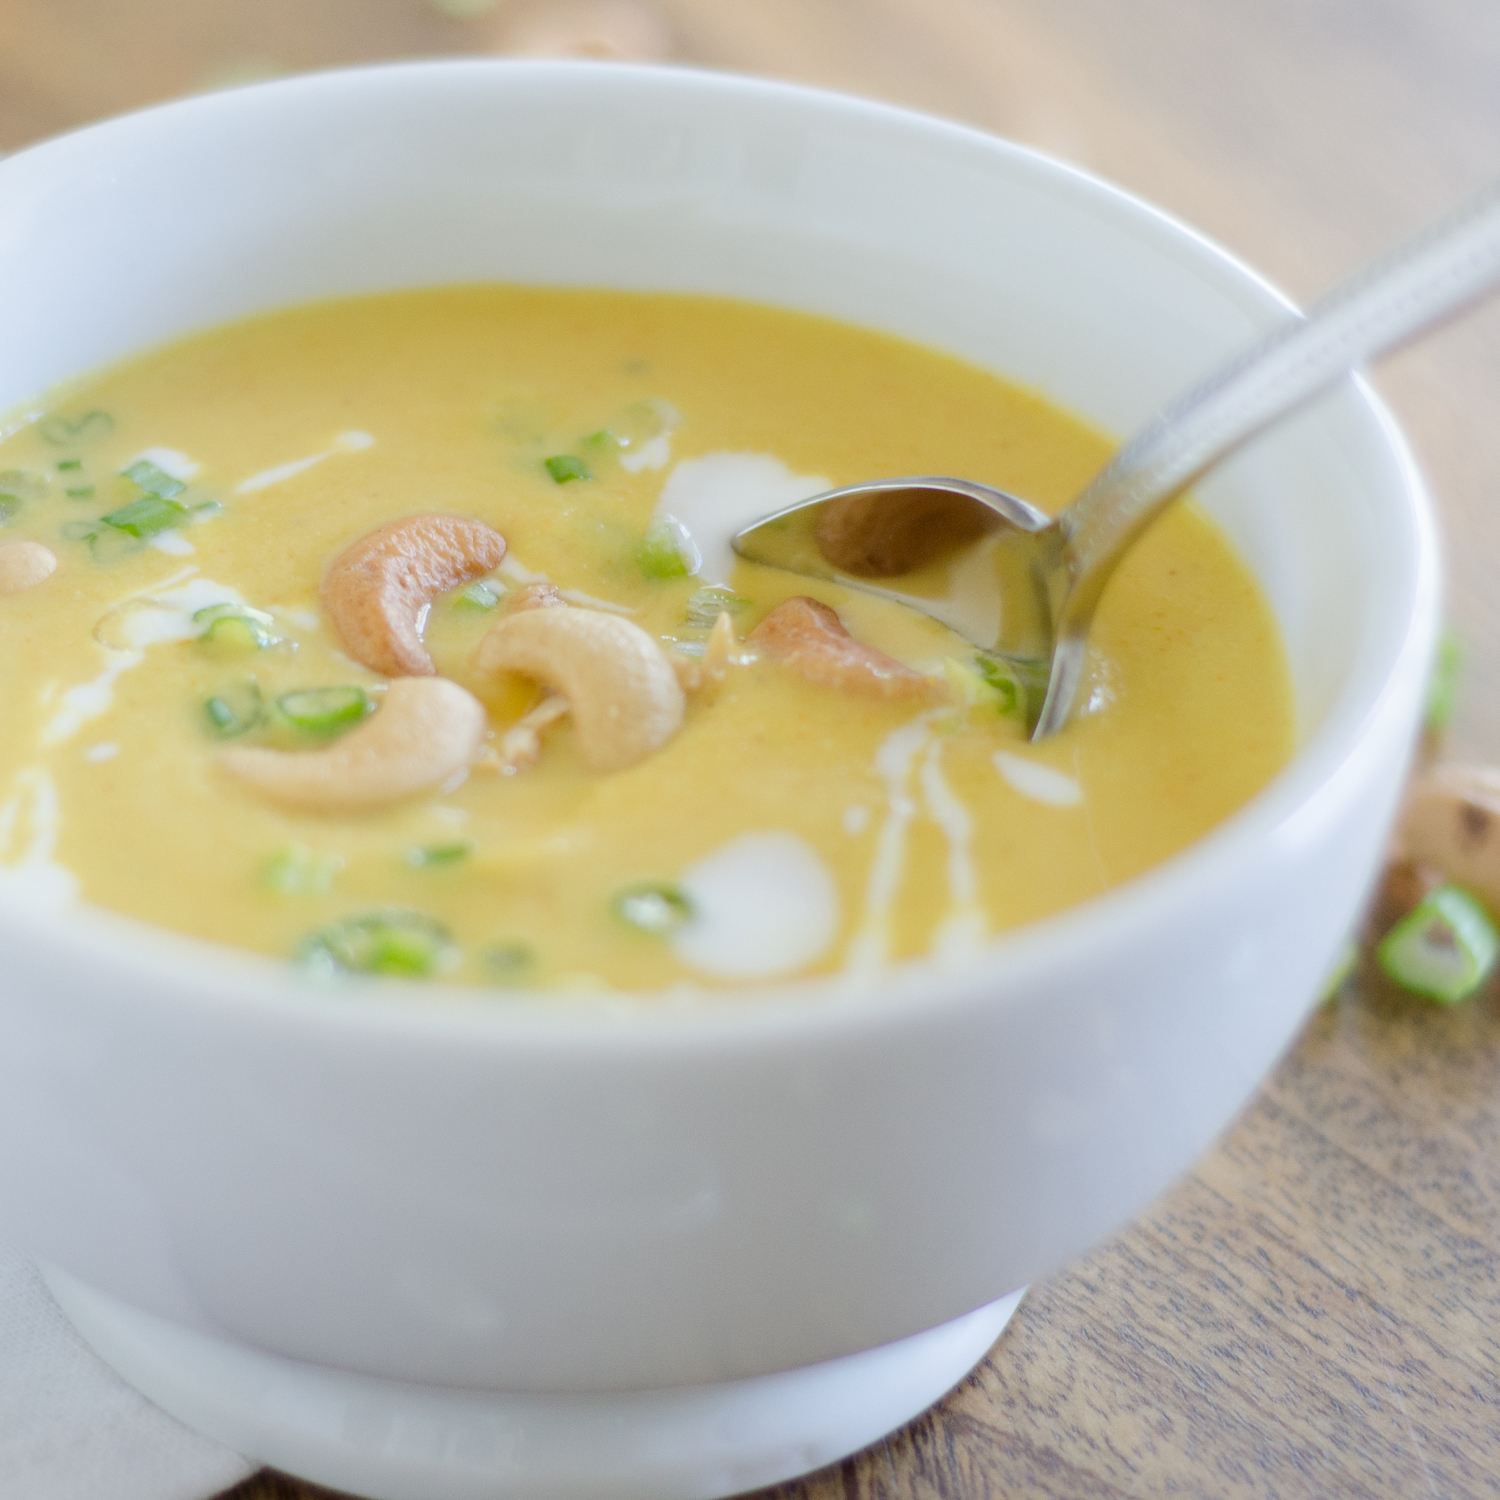 Creamy and delicious curried cauliflower soup recipe that is Whole 30 and Paleo!